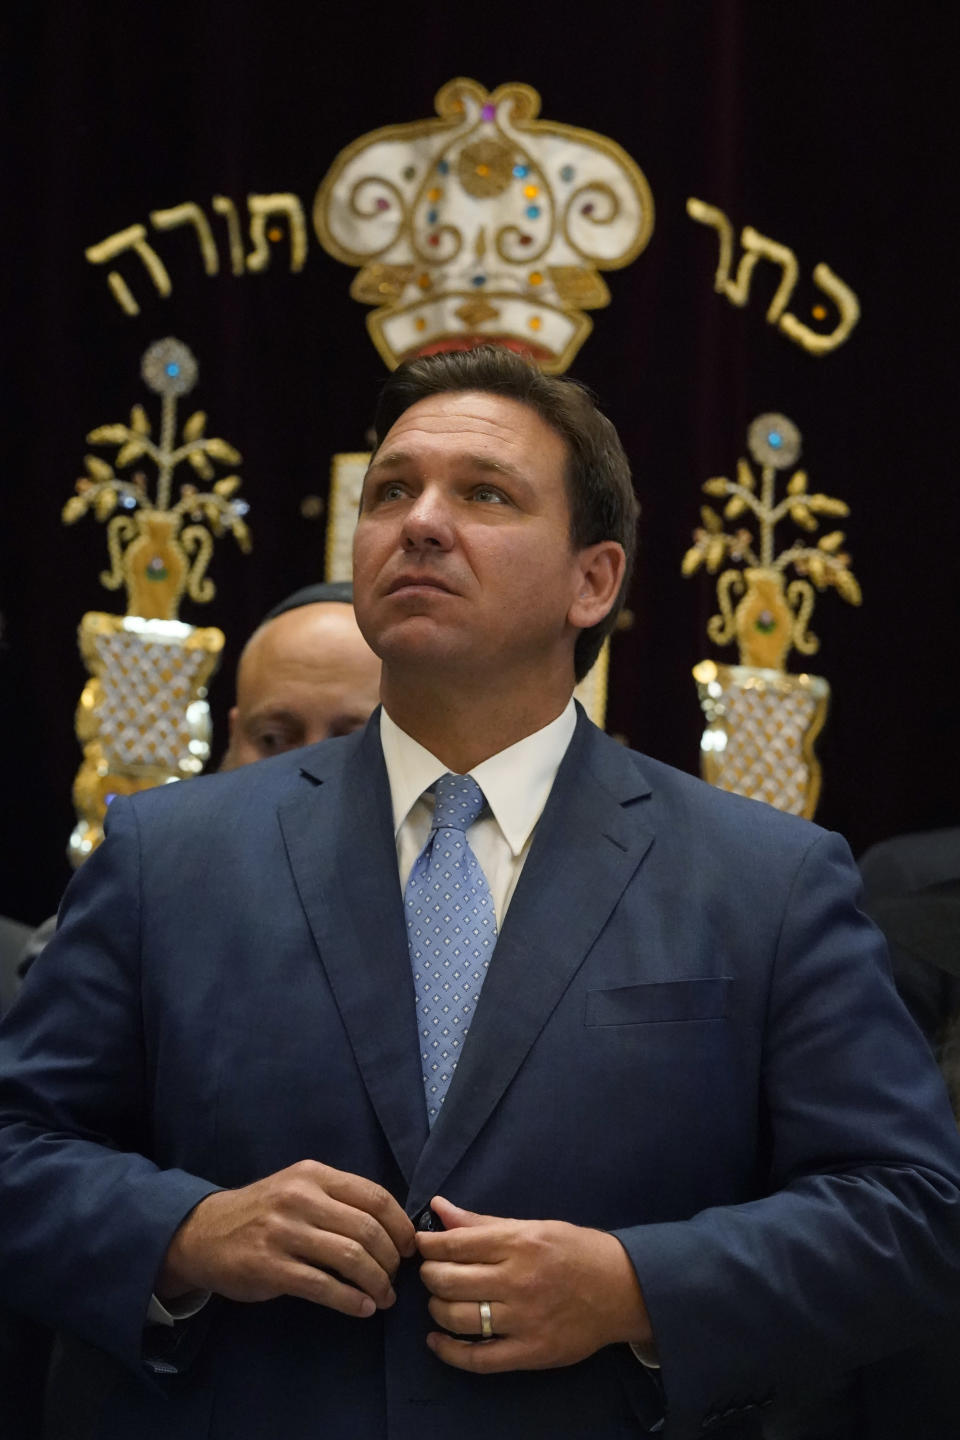 Florida Gov. Ron DeSantis buttons his jacket after speaking, Monday, June 14, 2021, at the Shul of Bal Harbour, a Jewish community center in Surfside, Fla. DeSantis visited the South Florida temple to denounce anti-Semitism and stand with Israel, while signing a bill into law that would require public schools in his state to set aside moments of silence for children to meditate or pray. (AP Photo/Wilfredo Lee)